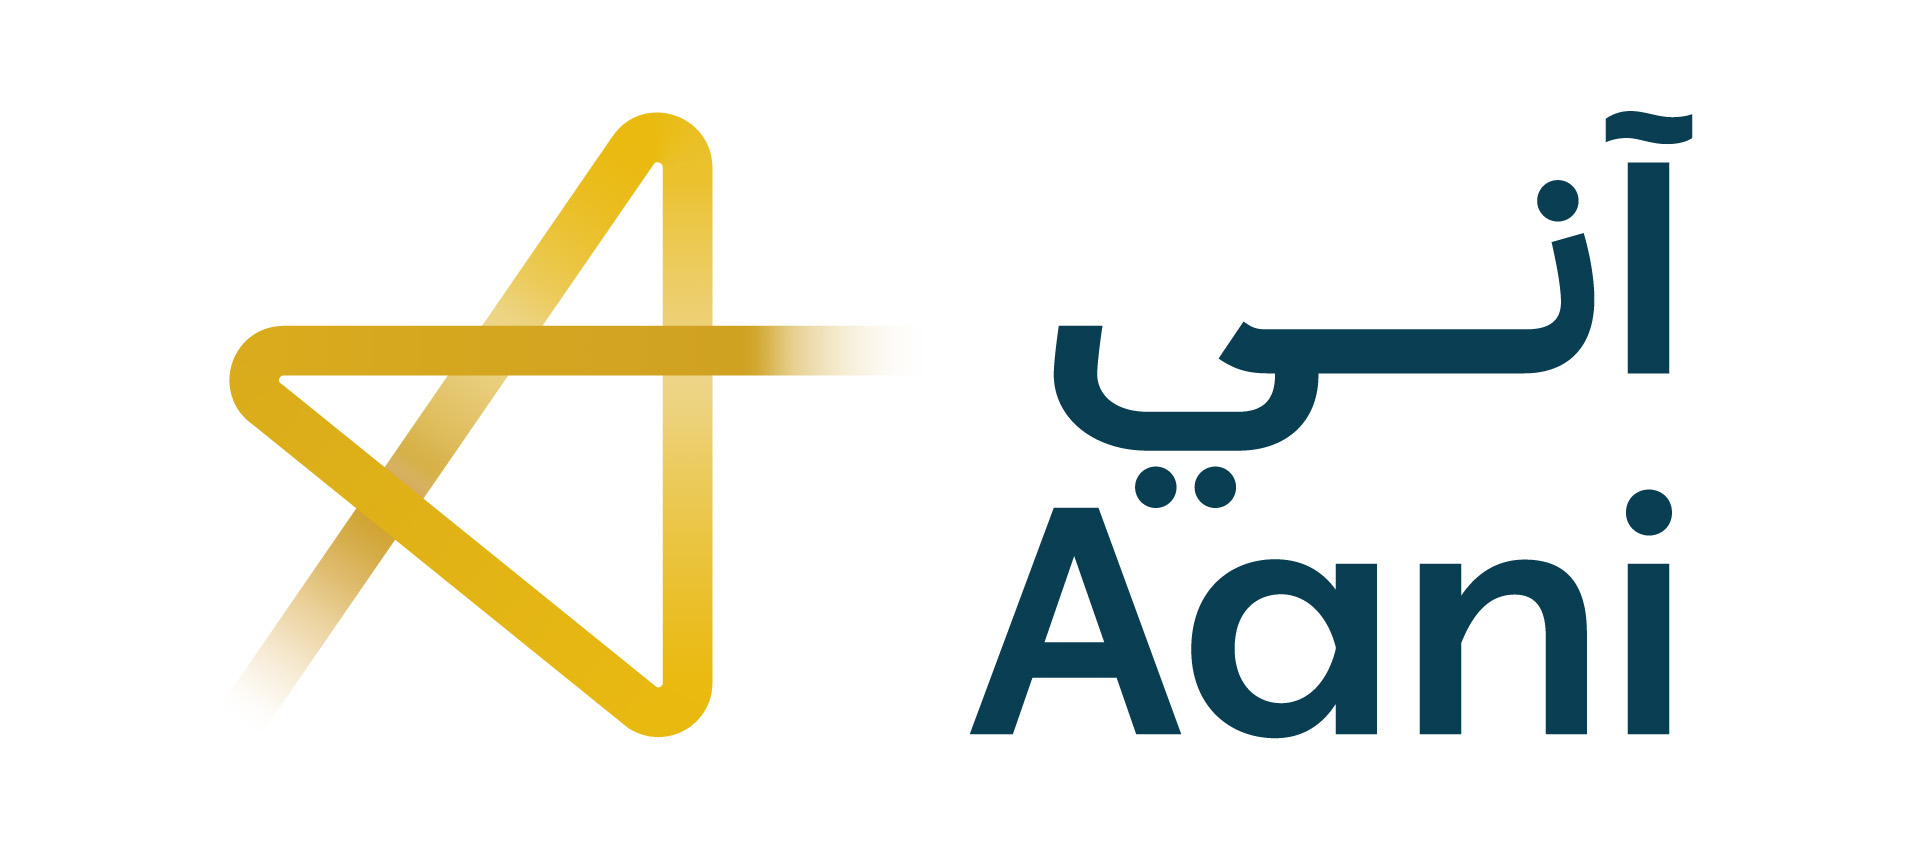 AD Ports Group and National Marine Dredging Group to Establish SAFEEN Surveys and Subsea Services